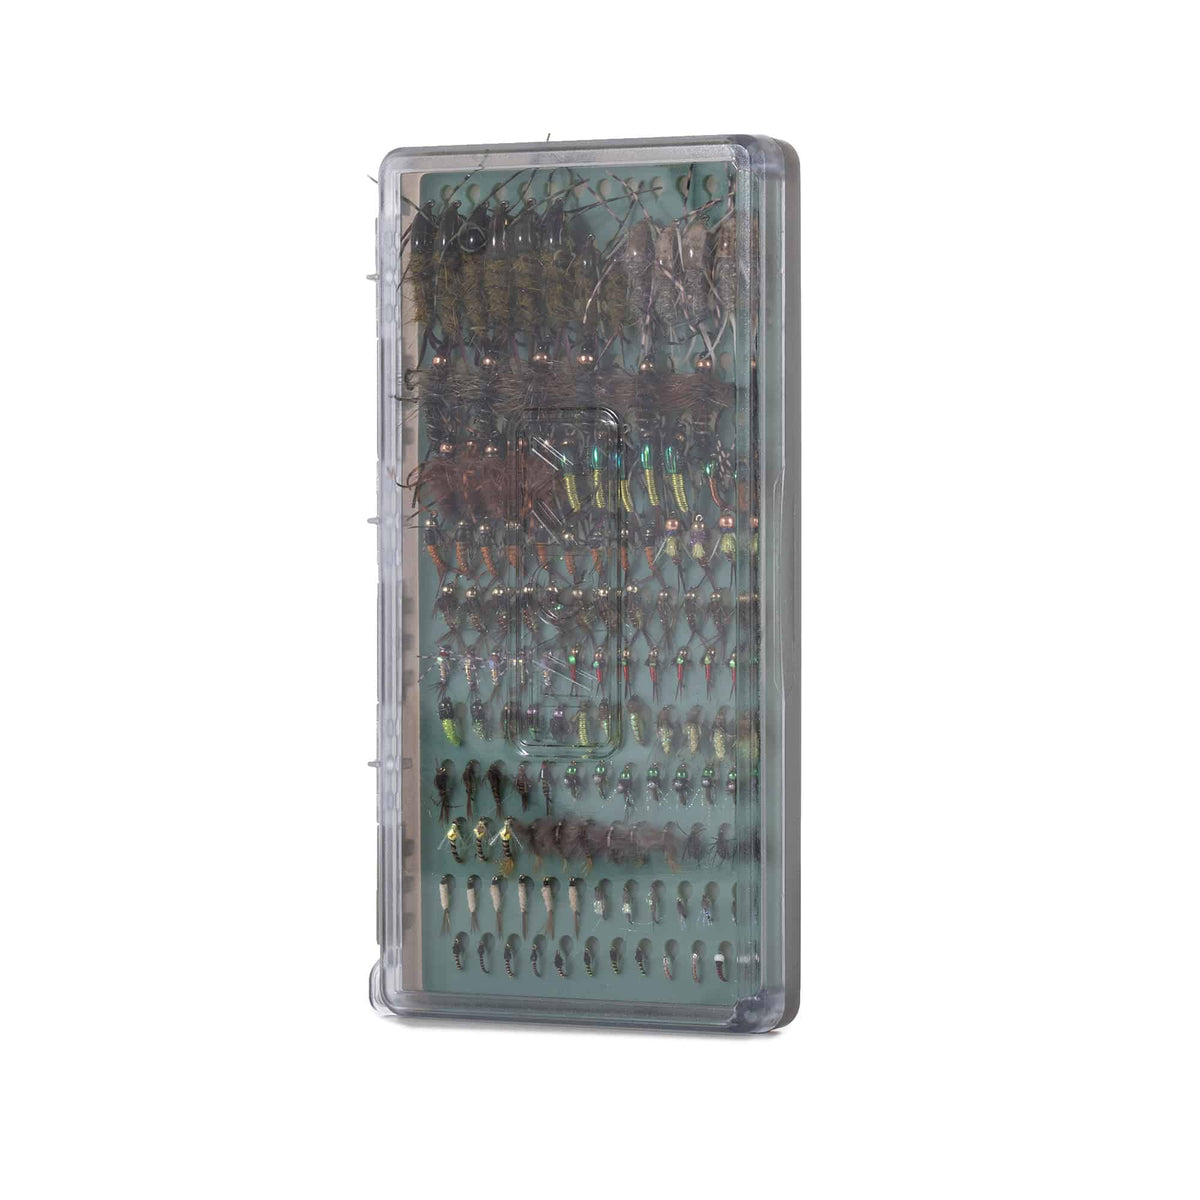 Tacky Original Fly Box Closed See Through Cover With Flies